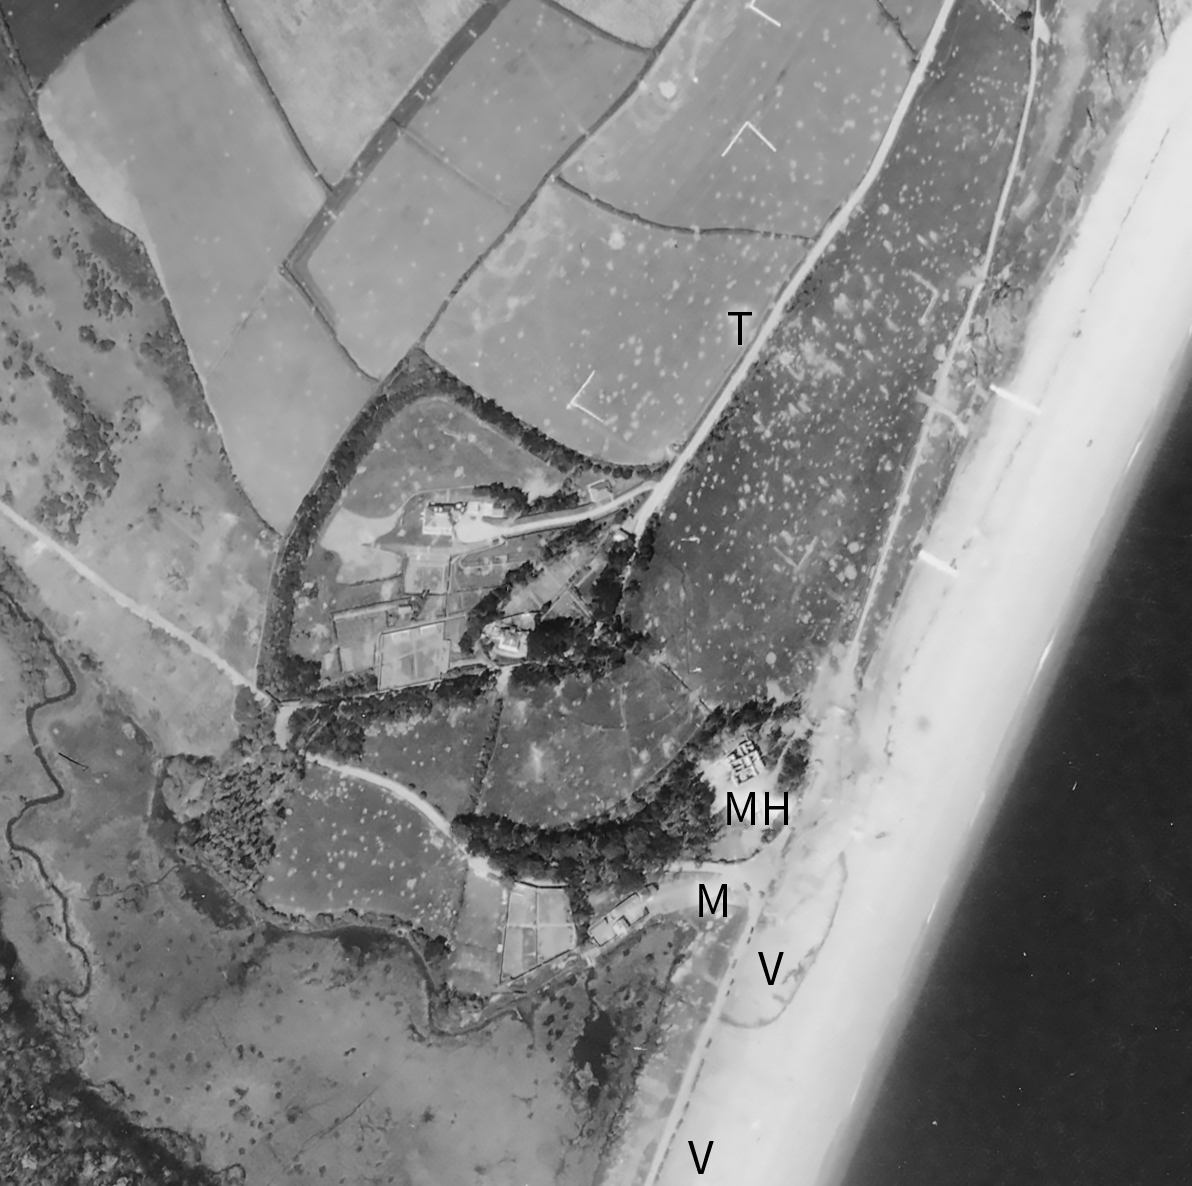 Detail from a black and white vertical aerial photograph looking down on a group of buildings adjacent to a narrow beach. The sloping hill leadingfrom the beach and the fields behind are pockmarked with shell holes. The building closest to the beach is roofless. On the sloping hill and in the fields behind are L-shaped markings, forming the corners of an incomplete rectangle. The letters 'MH', 'V', 'M' and 'T' applied to the image mark locations.